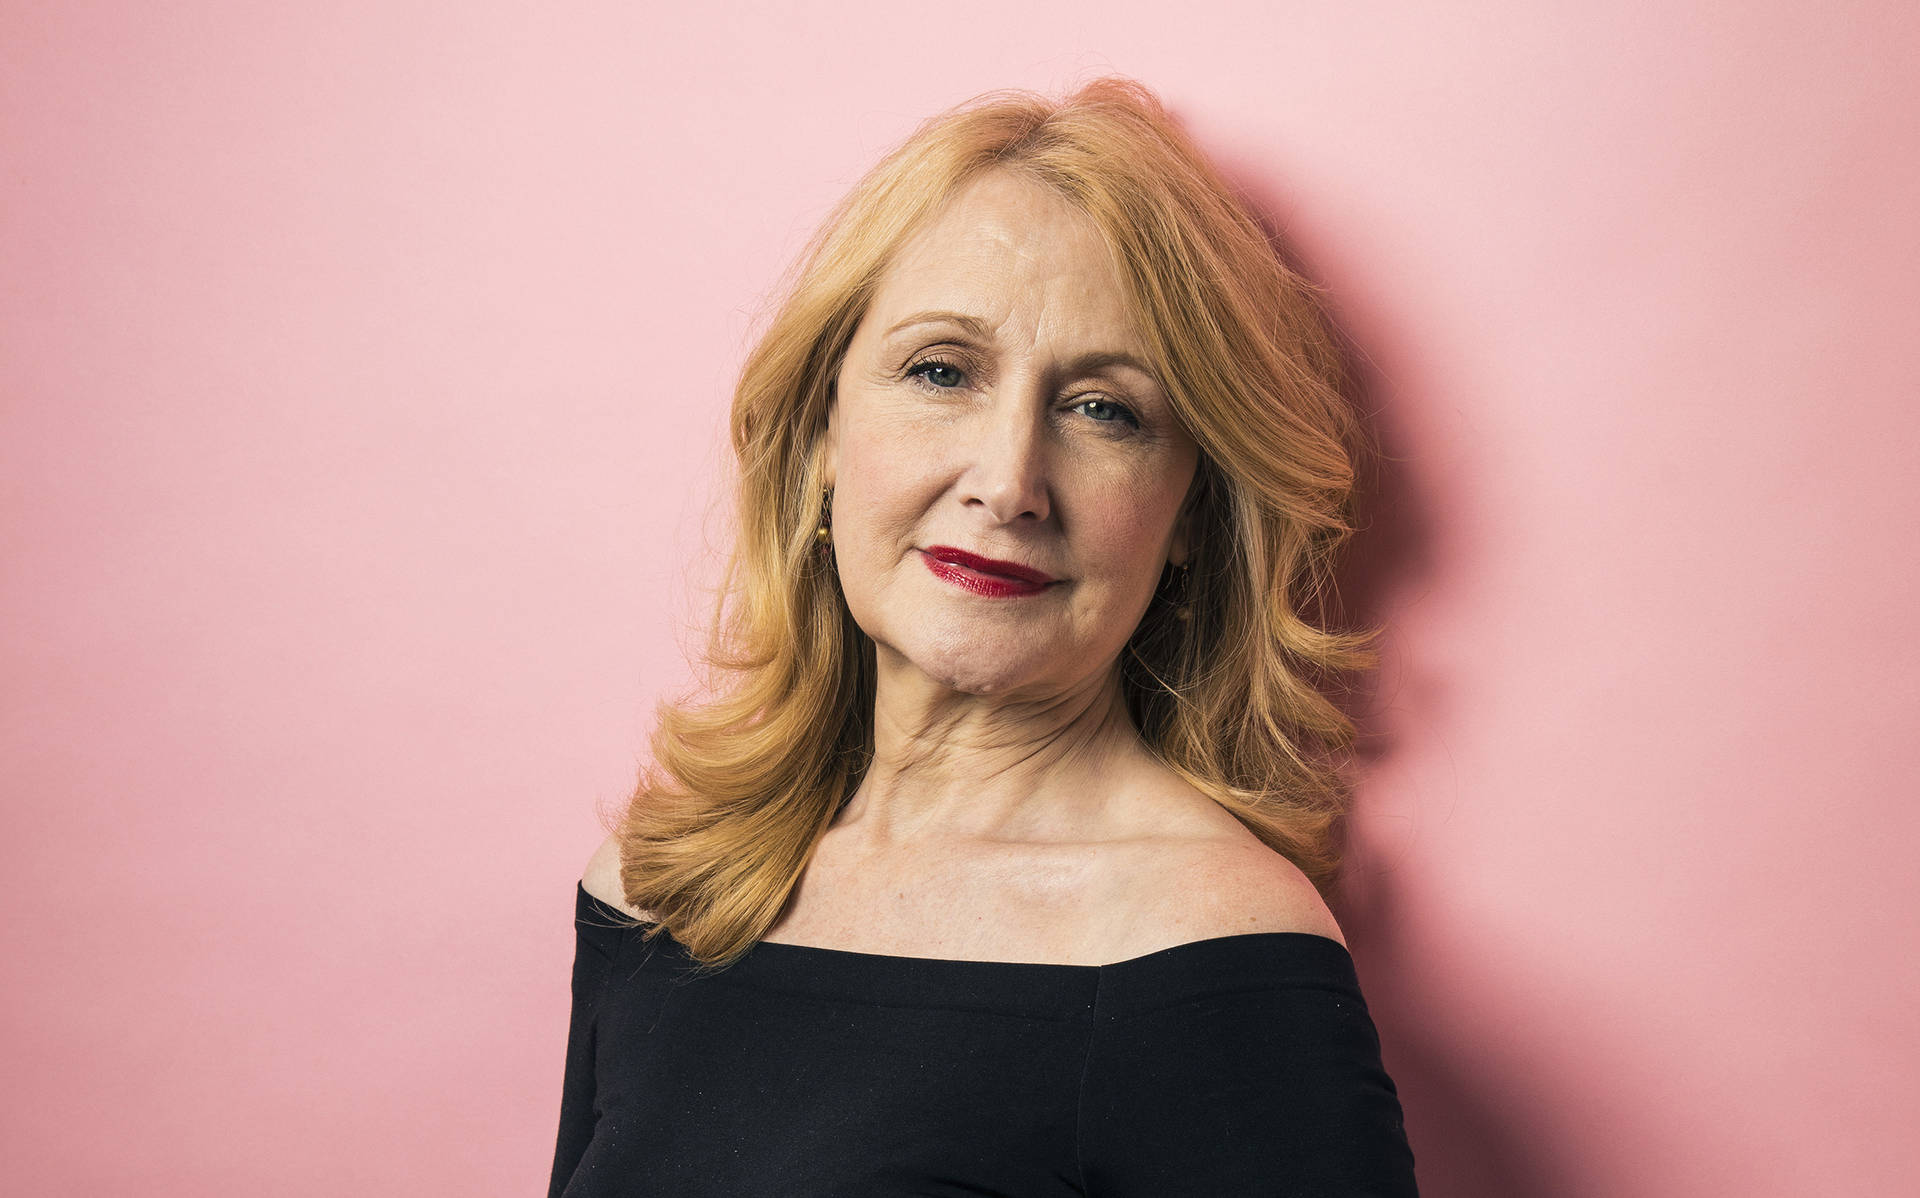 Patricia Clarkson In A Pink Room Wallpaper